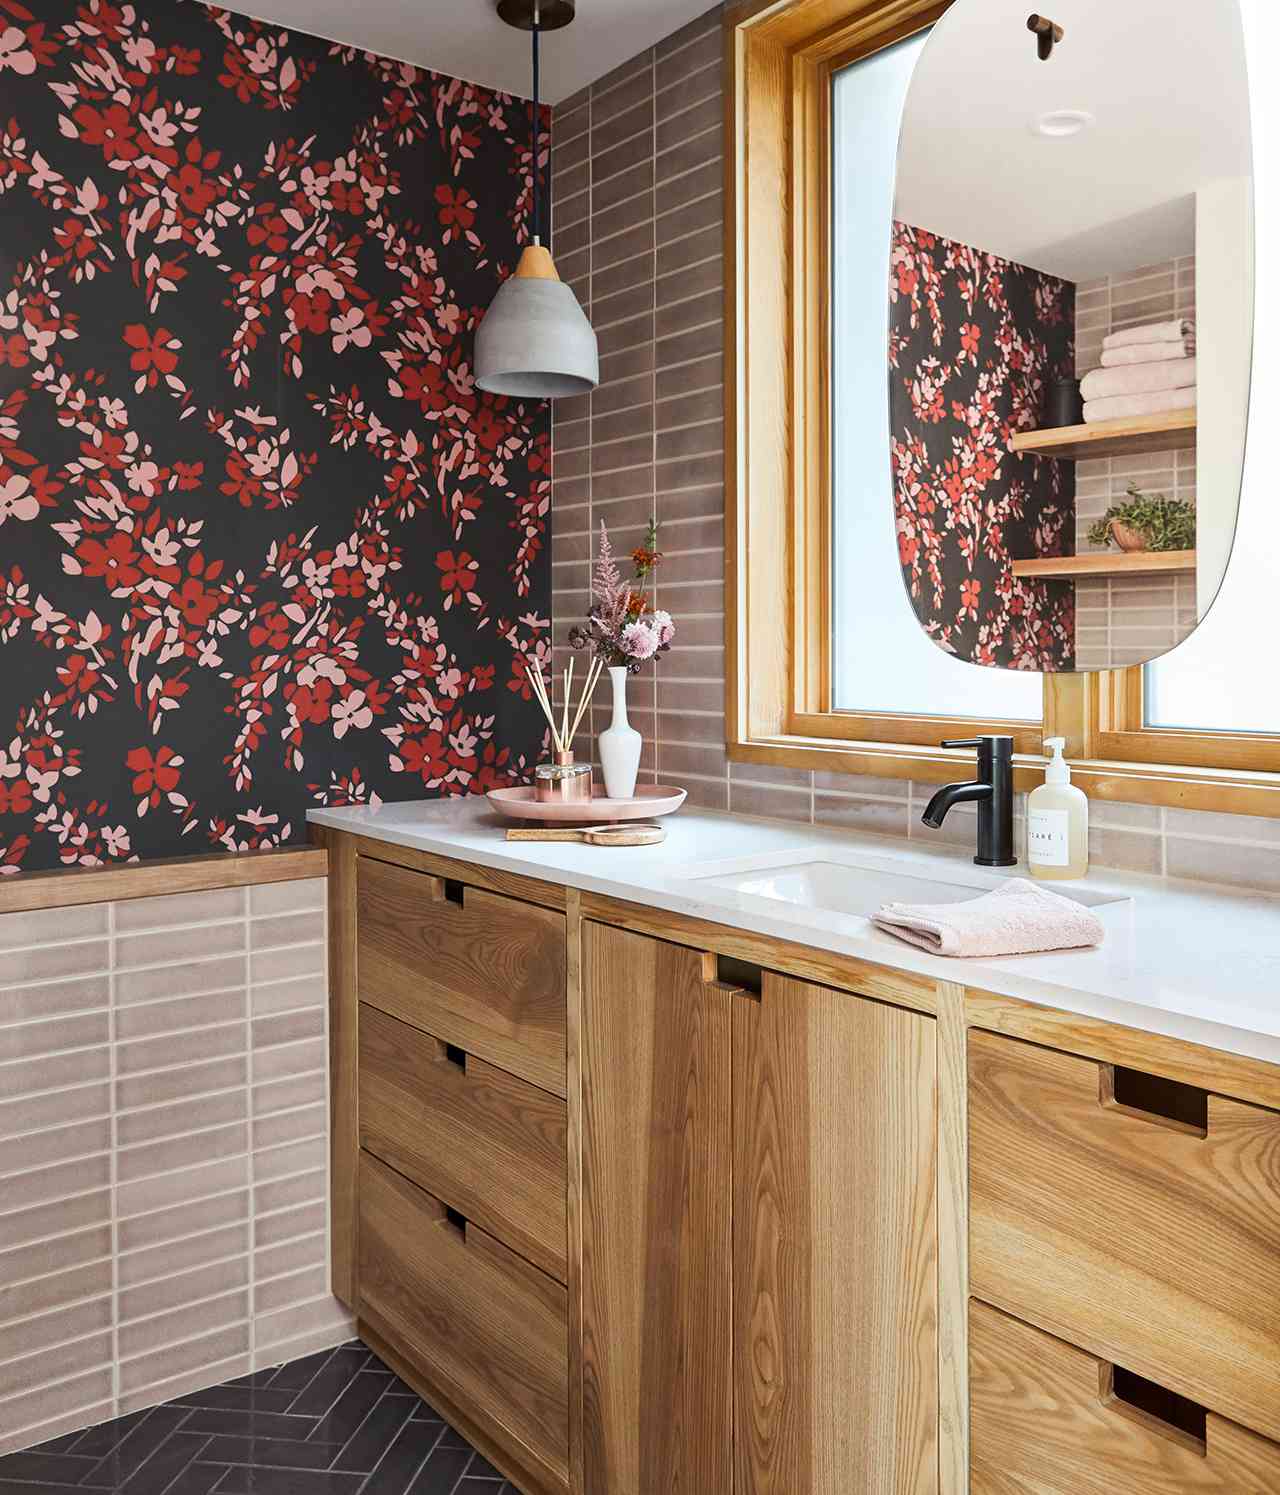 Image of a vanity section inside a bathroom with accent walls